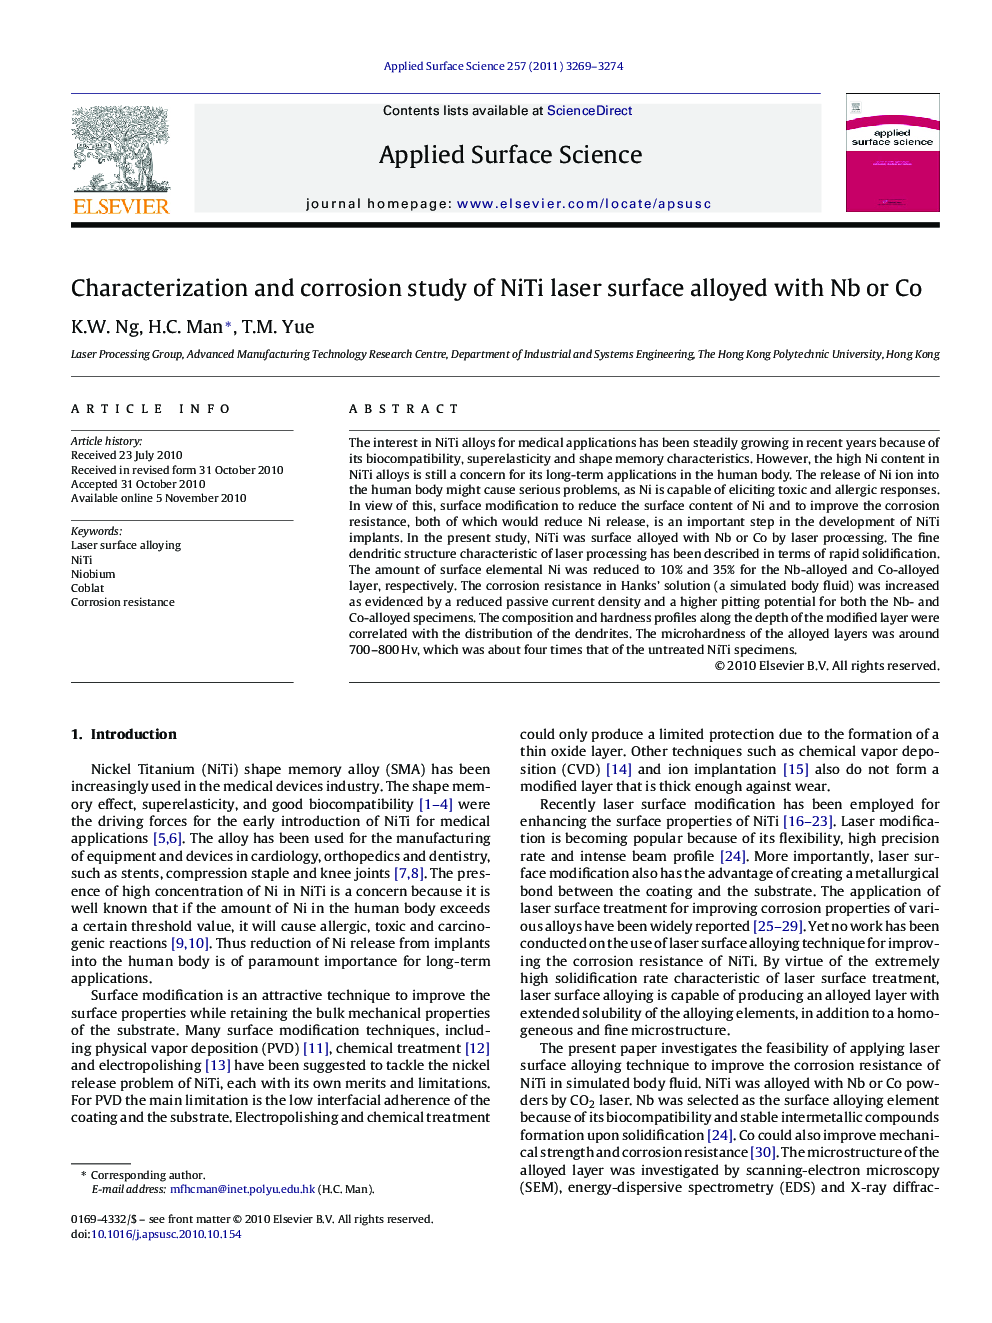 Characterization and corrosion study of NiTi laser surface alloyed with Nb or Co